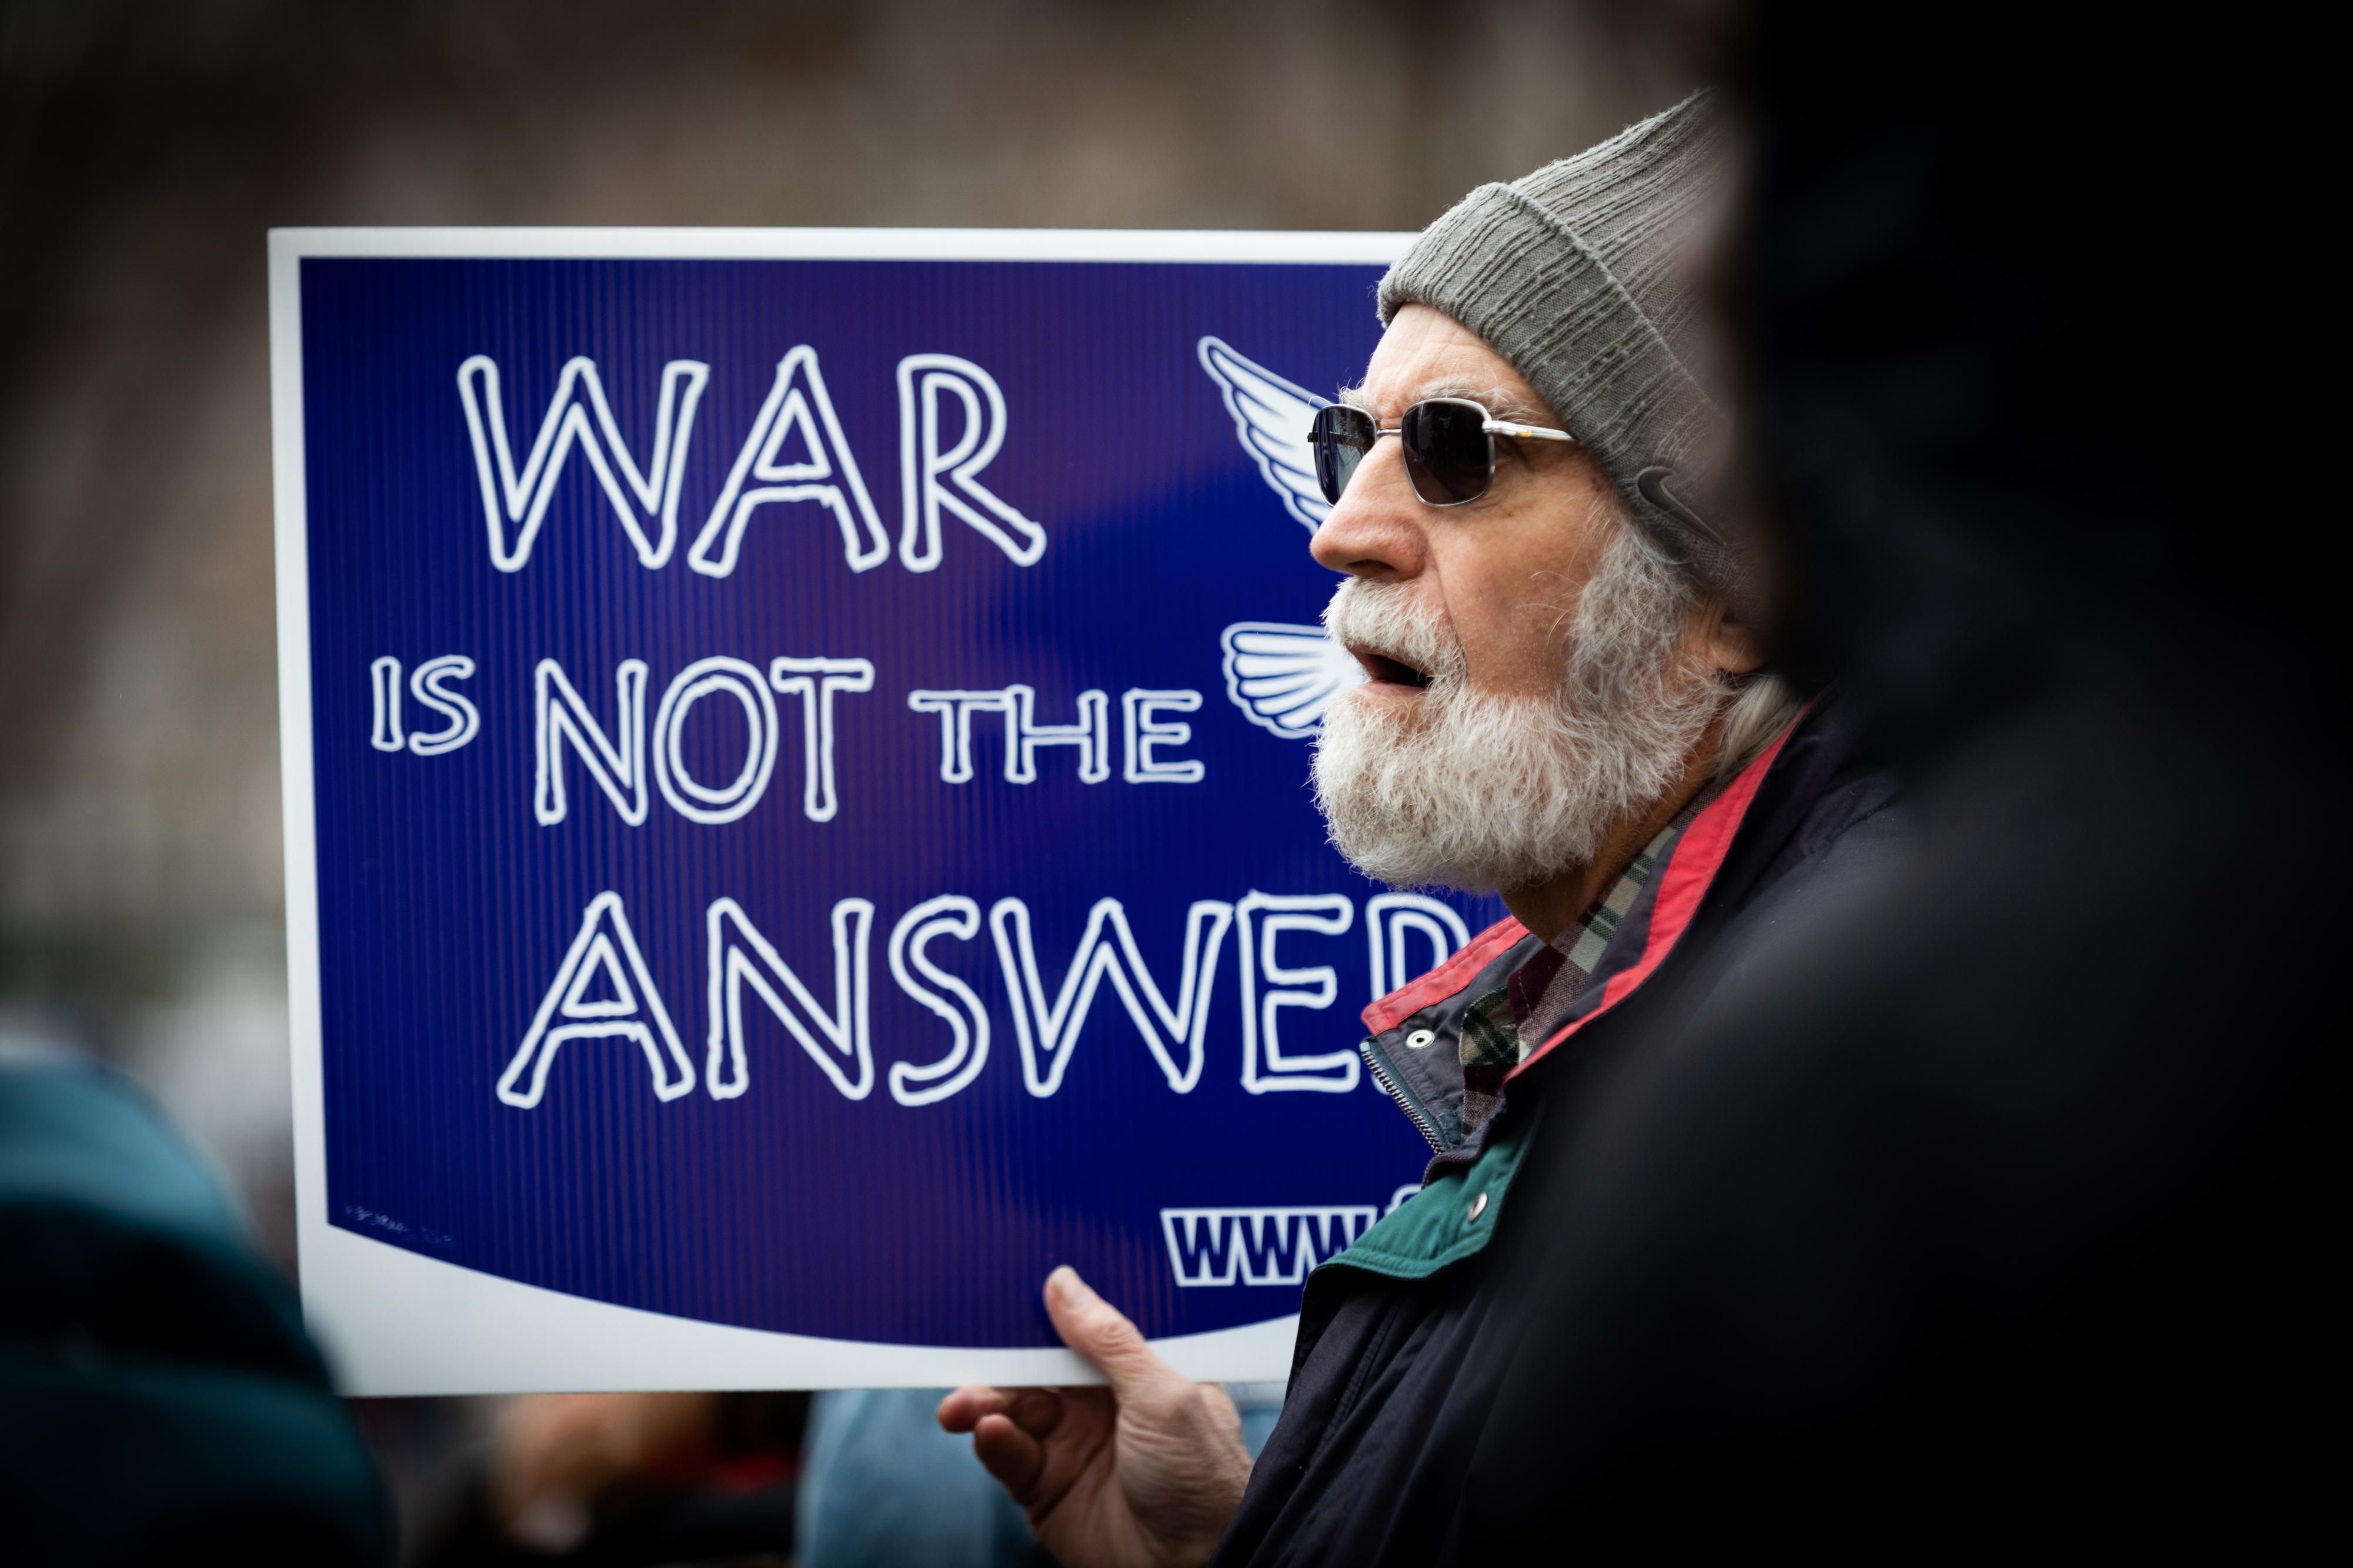 Anti-war protester holds up sign reading "War Is Not the Answer"